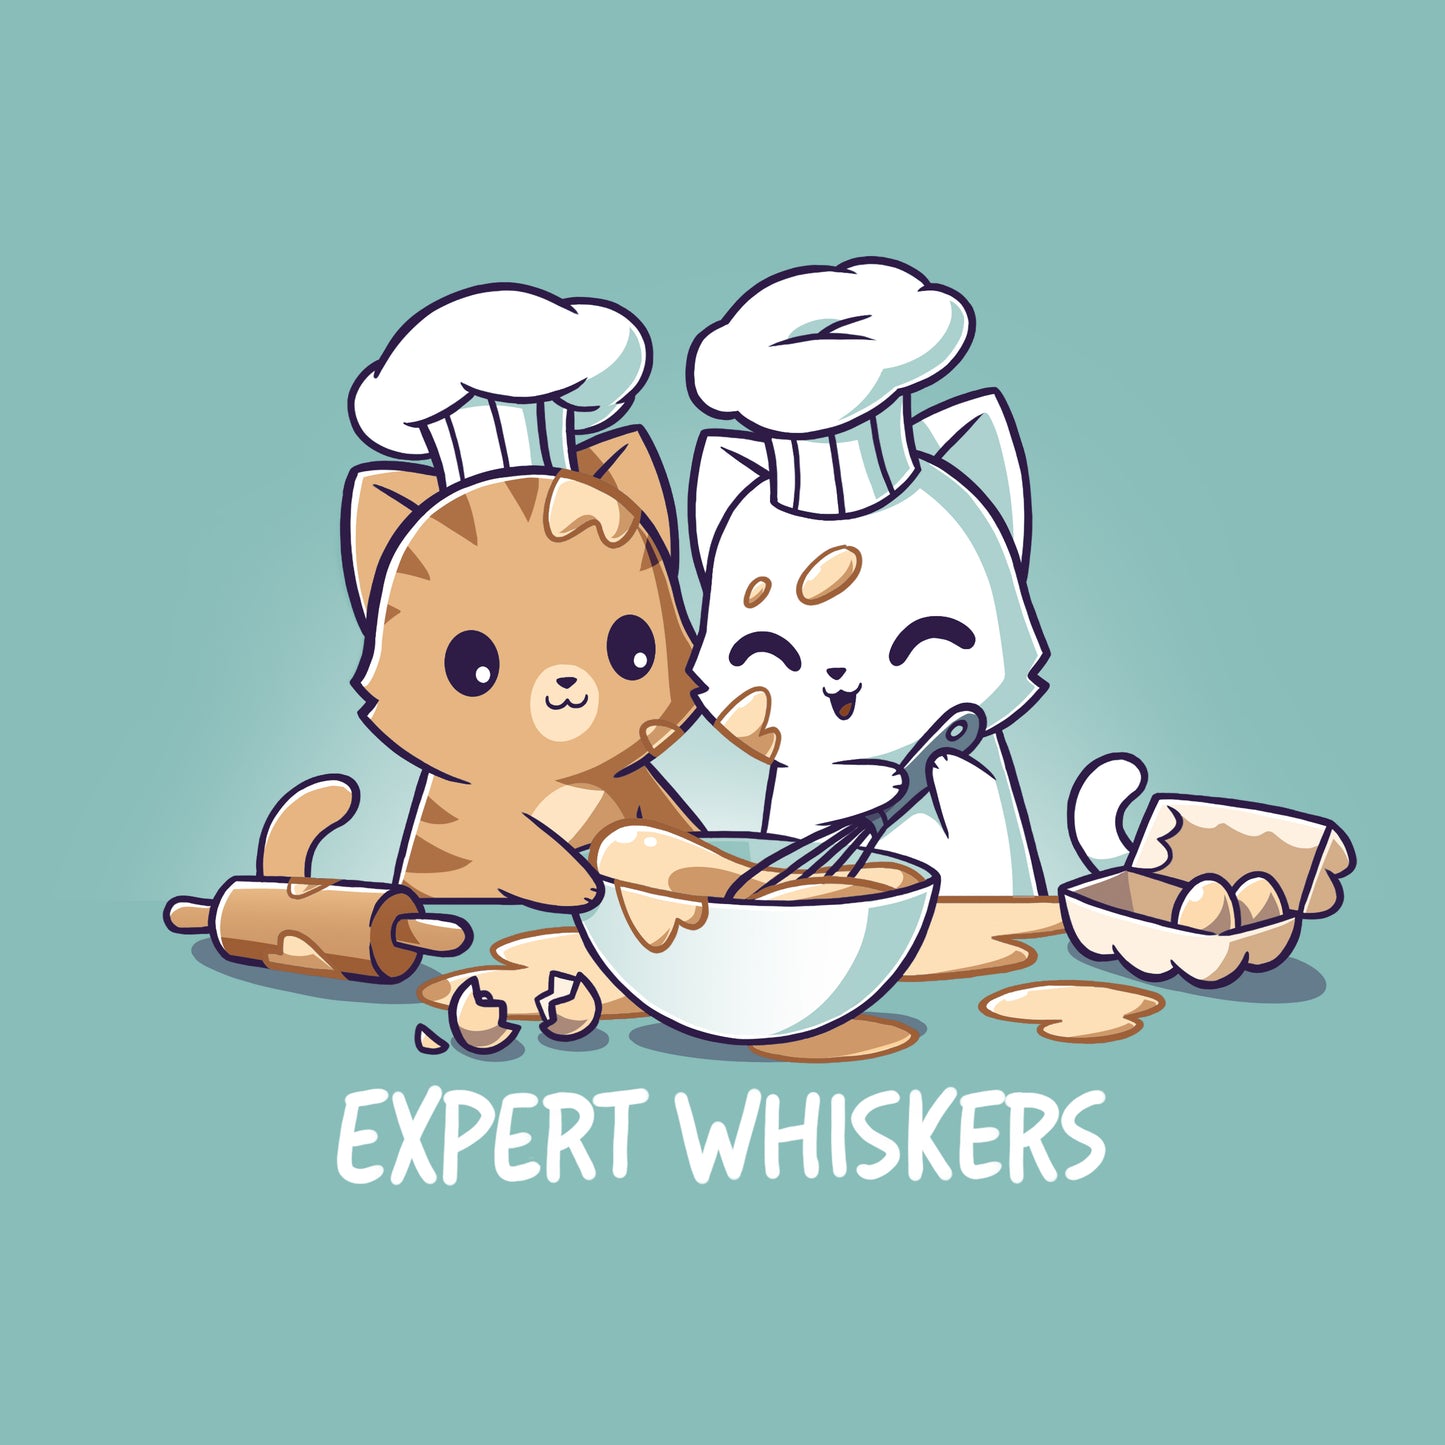 Expert Whiskers cartoon cats in chef hats making a cake on a TeeTurtle Ringspun Cotton T-shirt.